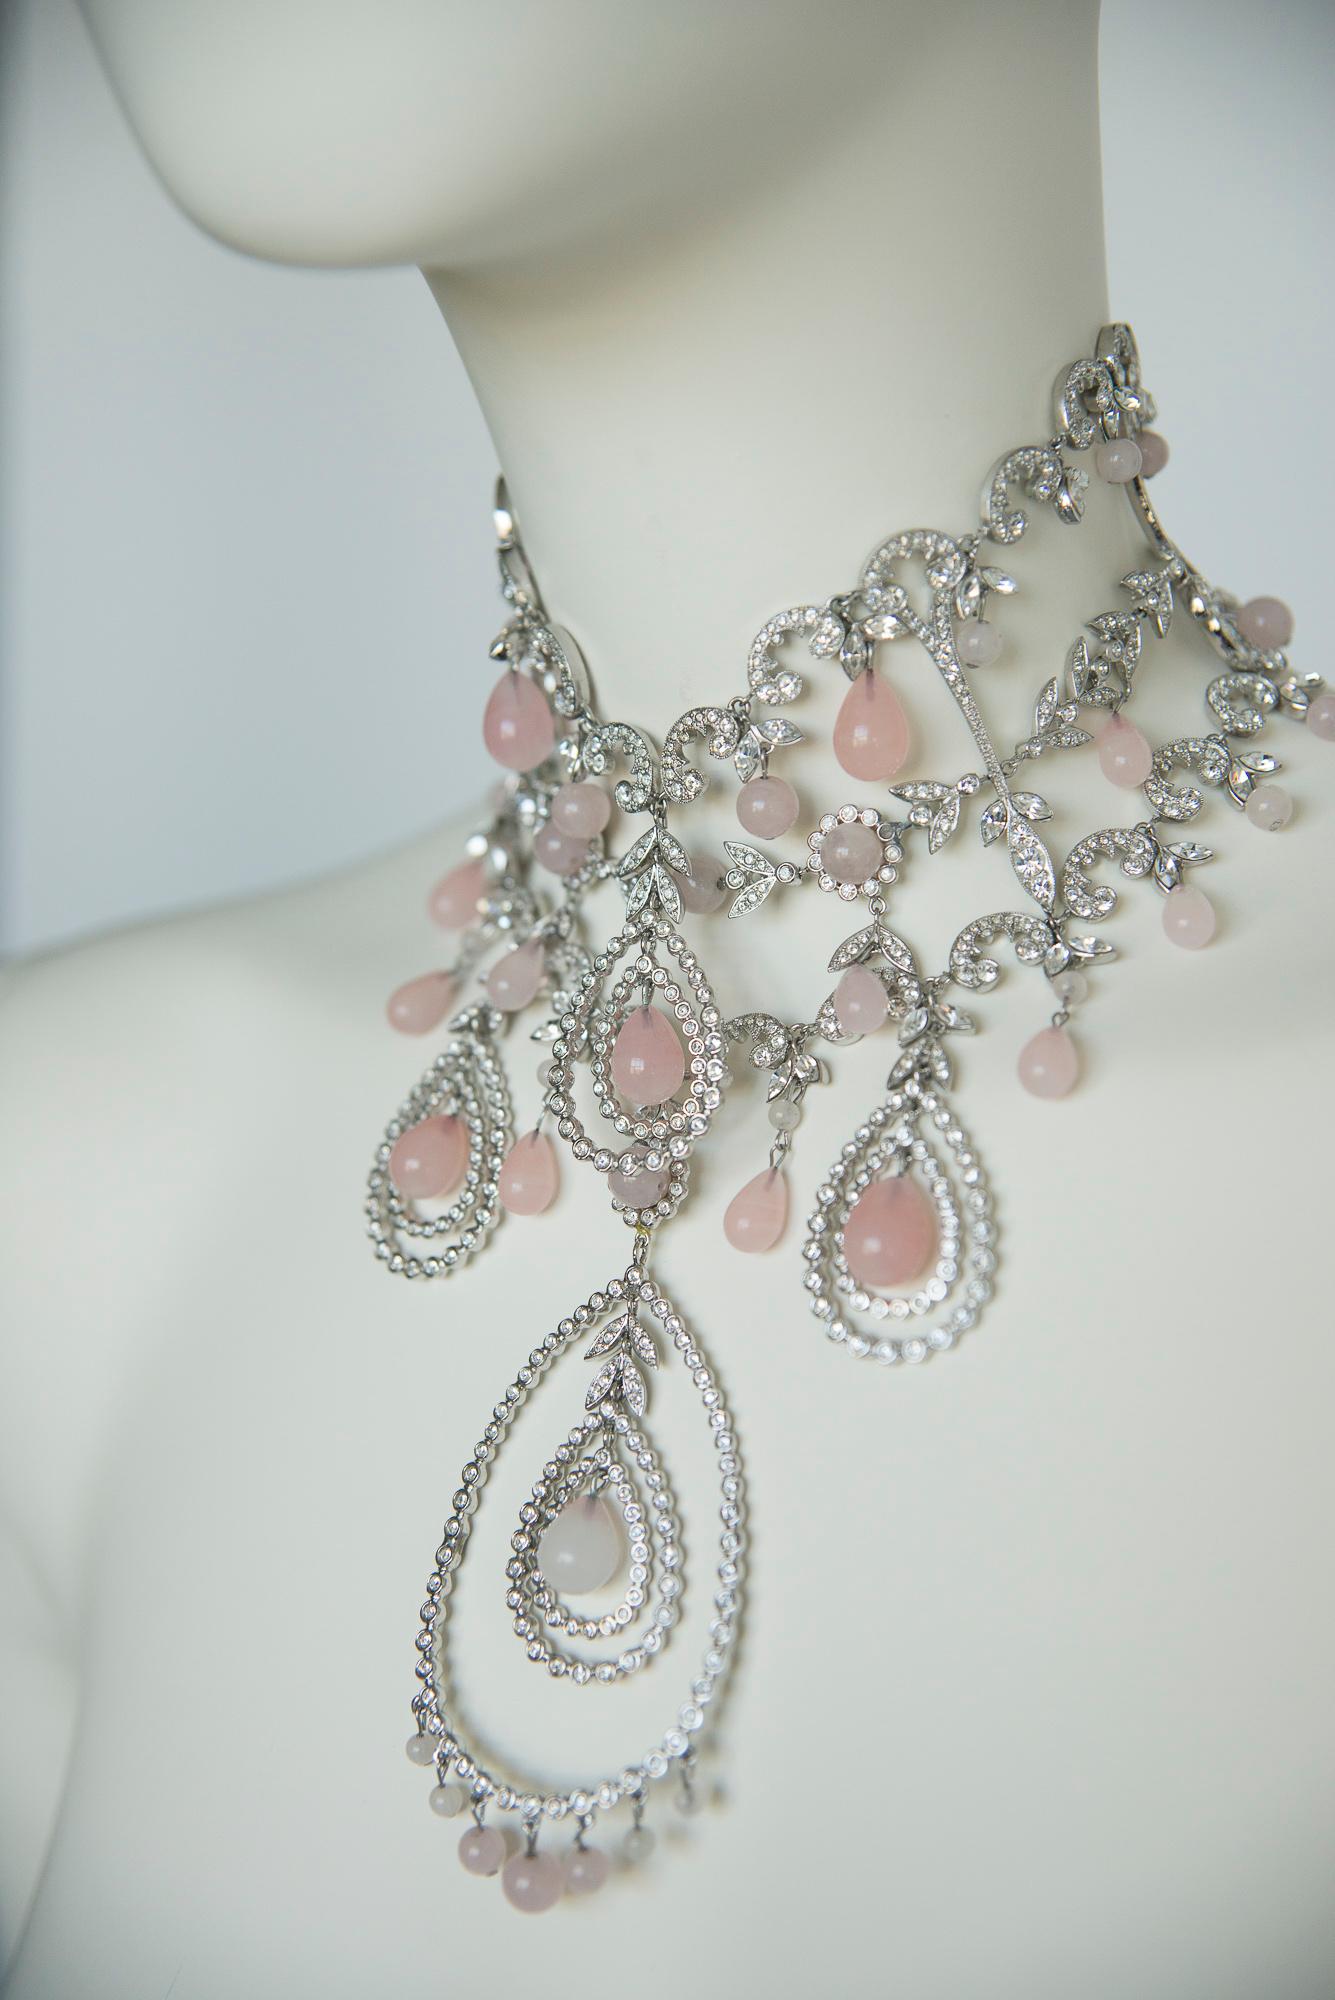 Christian Dior Couture Runway Crystal & Bead Choker Necklace, Fall-Winter 2003 2